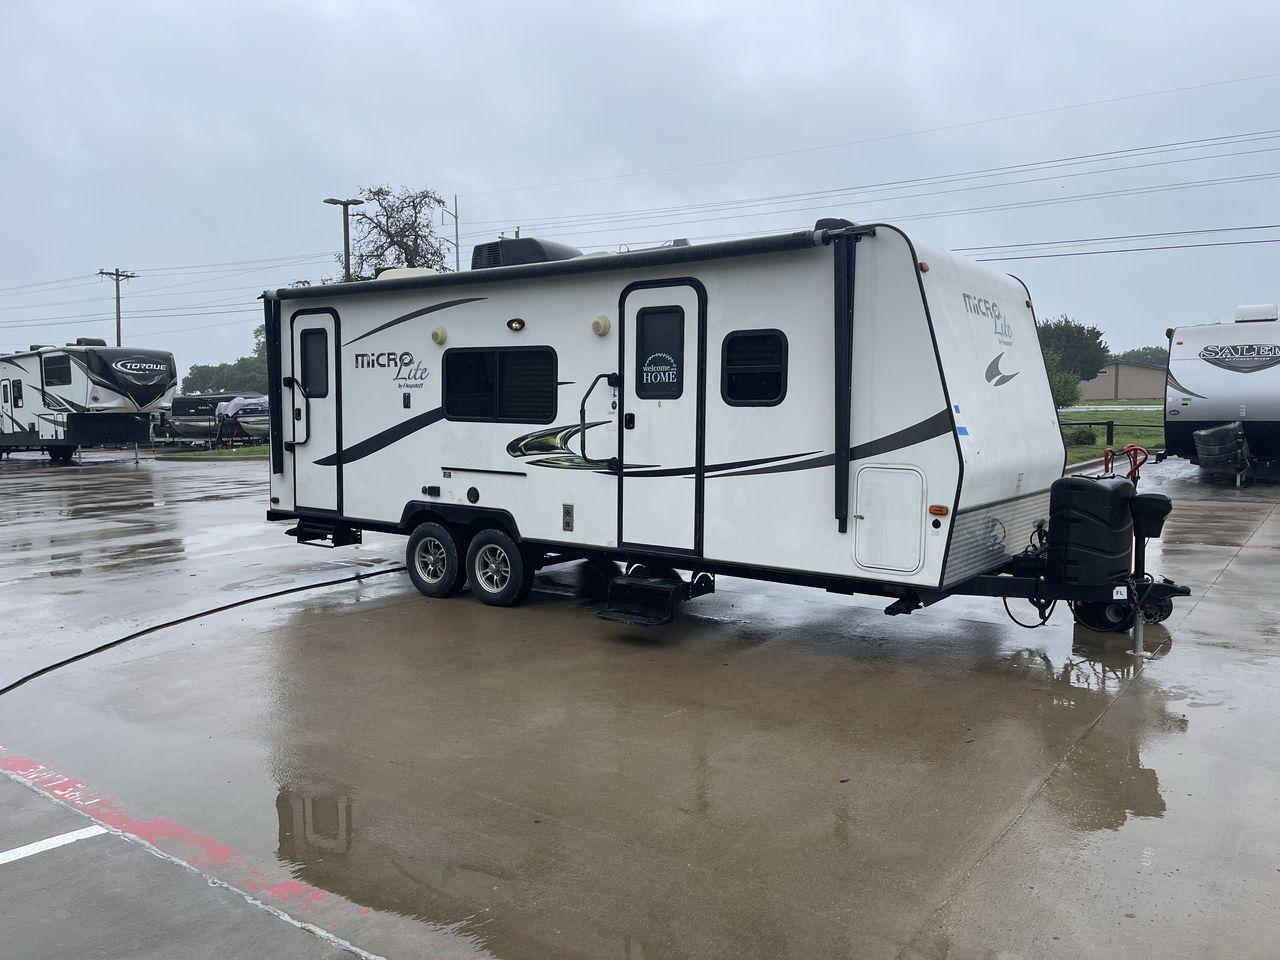 2015 FOREST RIVER FLAGSTAFF 25KS (4X4TFLA23FD) , Length: 25.67 ft. | Dry Weight: 4,310 lbs. | Gross Weight: 6,538 lbs. | Slides: 1 transmission, located at 4319 N Main Street, Cleburne, TX, 76033, (817) 221-0660, 32.435829, -97.384178 - The 2015 Forest River Flagstaff 25KS is a dual-axle steel wheel set-up measuring 25.67 ft. in length. It has a dry weight of 4,310 lbs. and a GVWR of 6,538 lbs. It has 1 power slide. Its exterior comes with a power awning with LED lights underneath to light up your campsite, plus a couple of spea - Photo #23